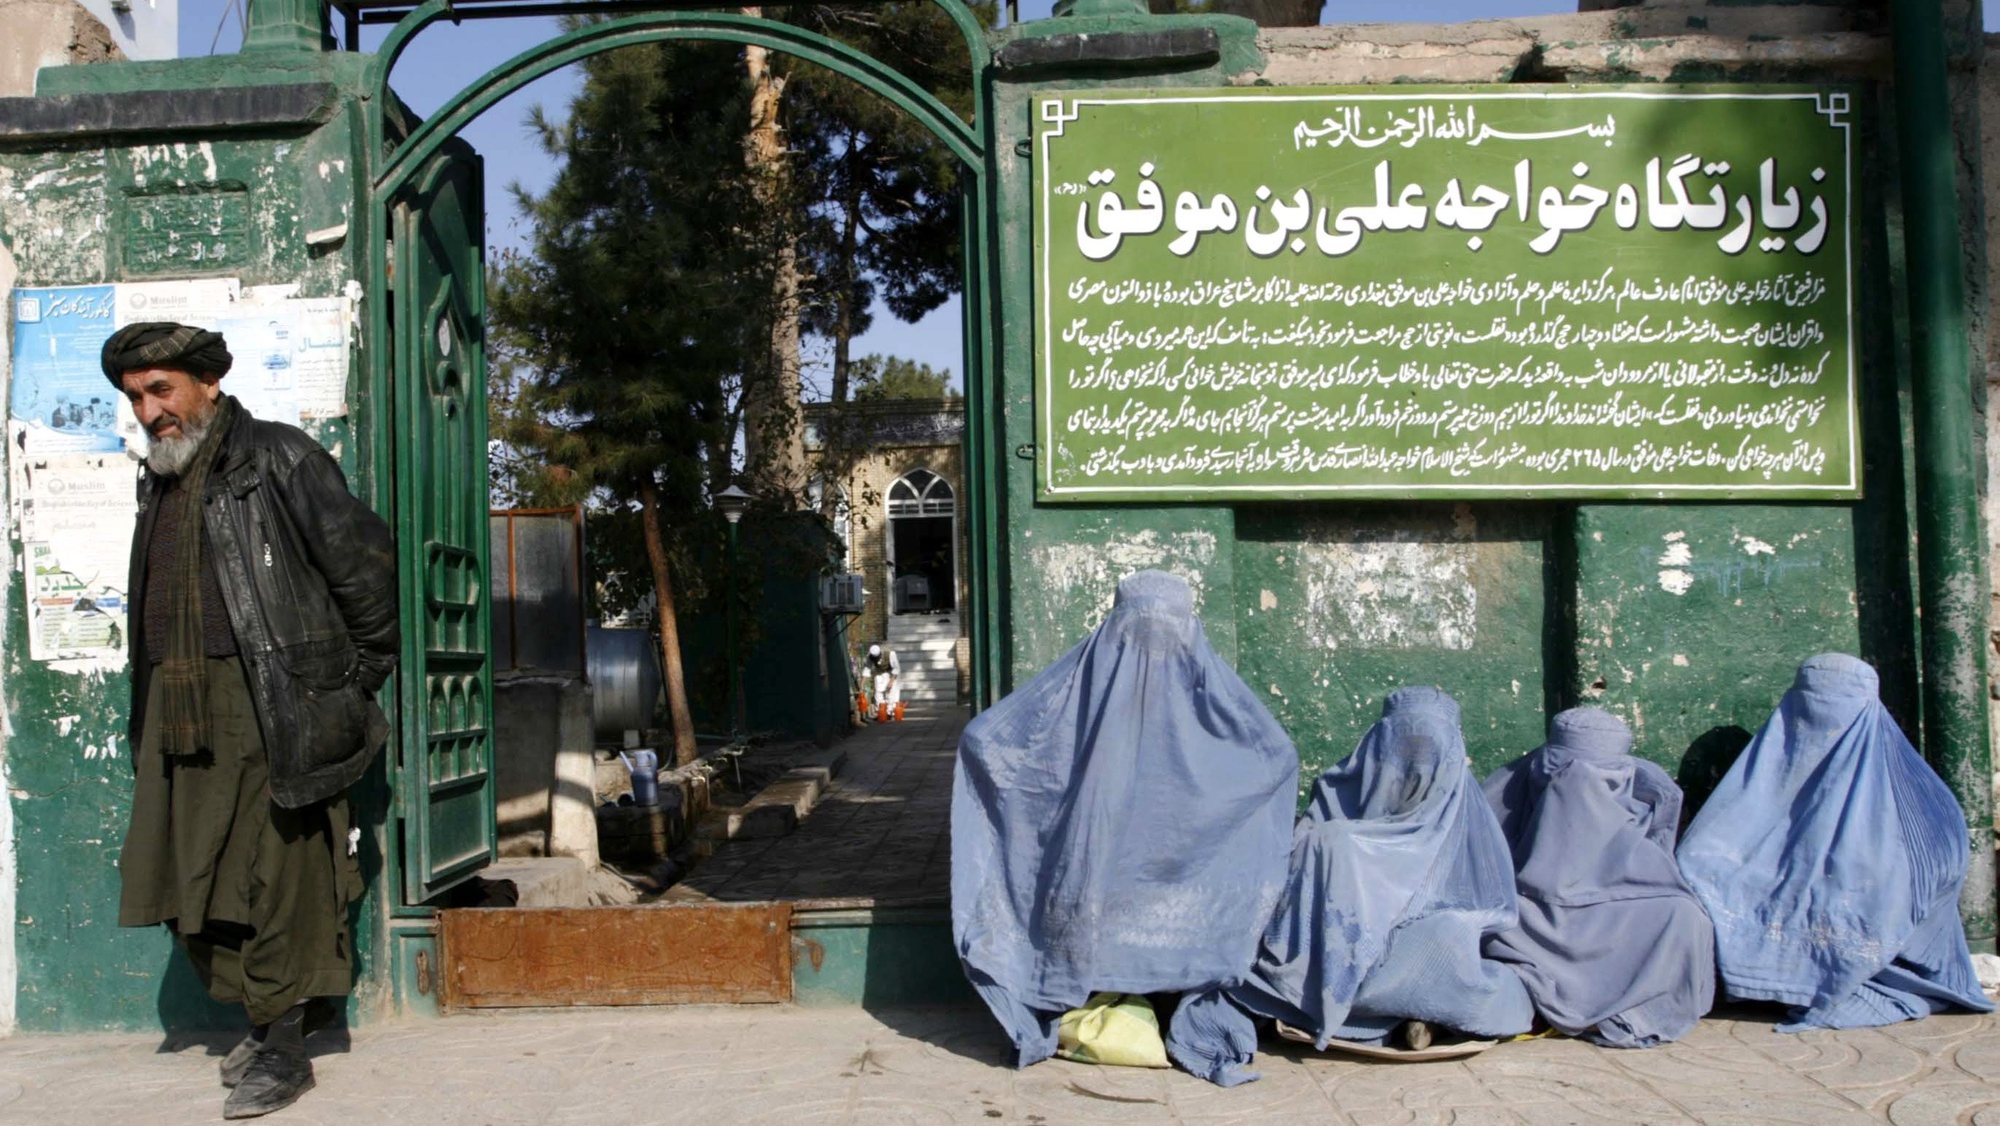 epa03490034 An Afghan burqa-clad women beg outside the Shrine of saint Khawaja Ali bin Moofiq in Herat, Afghanistan, 29 November 2012. Herat is the third largest city in Afghanistan, which lies on the trade routes connecting the Middle East, Central and South Asia.  EPA/JALIL REZAYEE